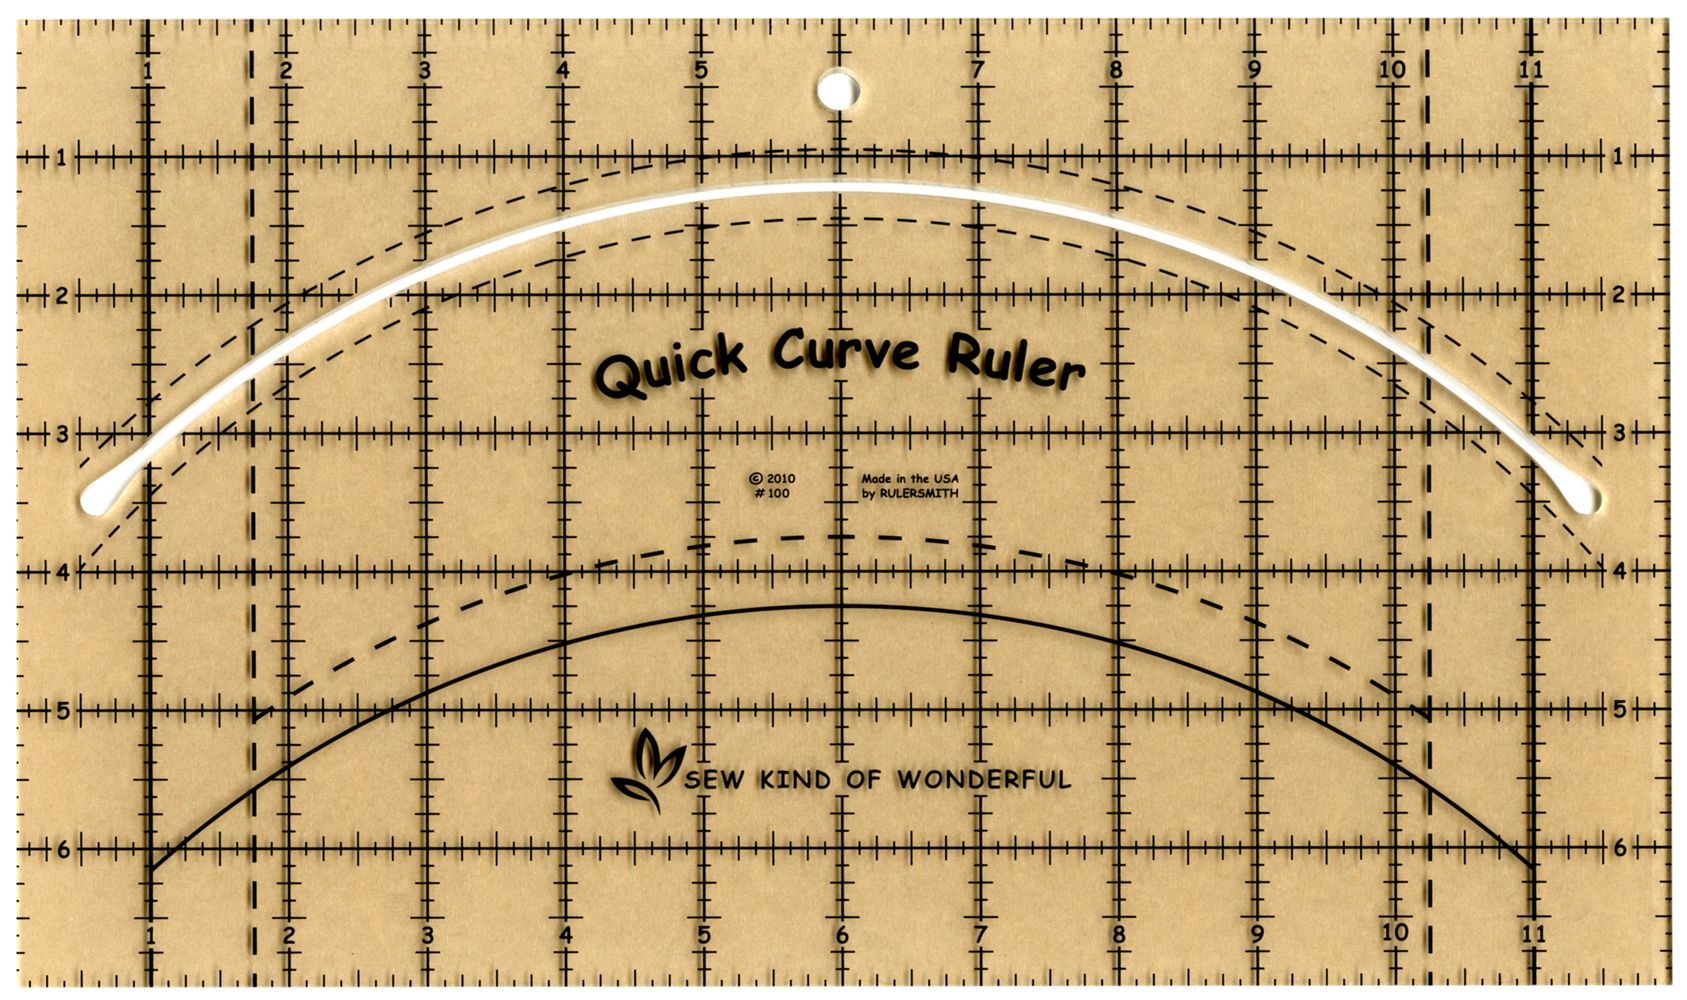 Quick Curve Quilt Ruler by Jenny Pedigo for Sew Kind of Wonderful